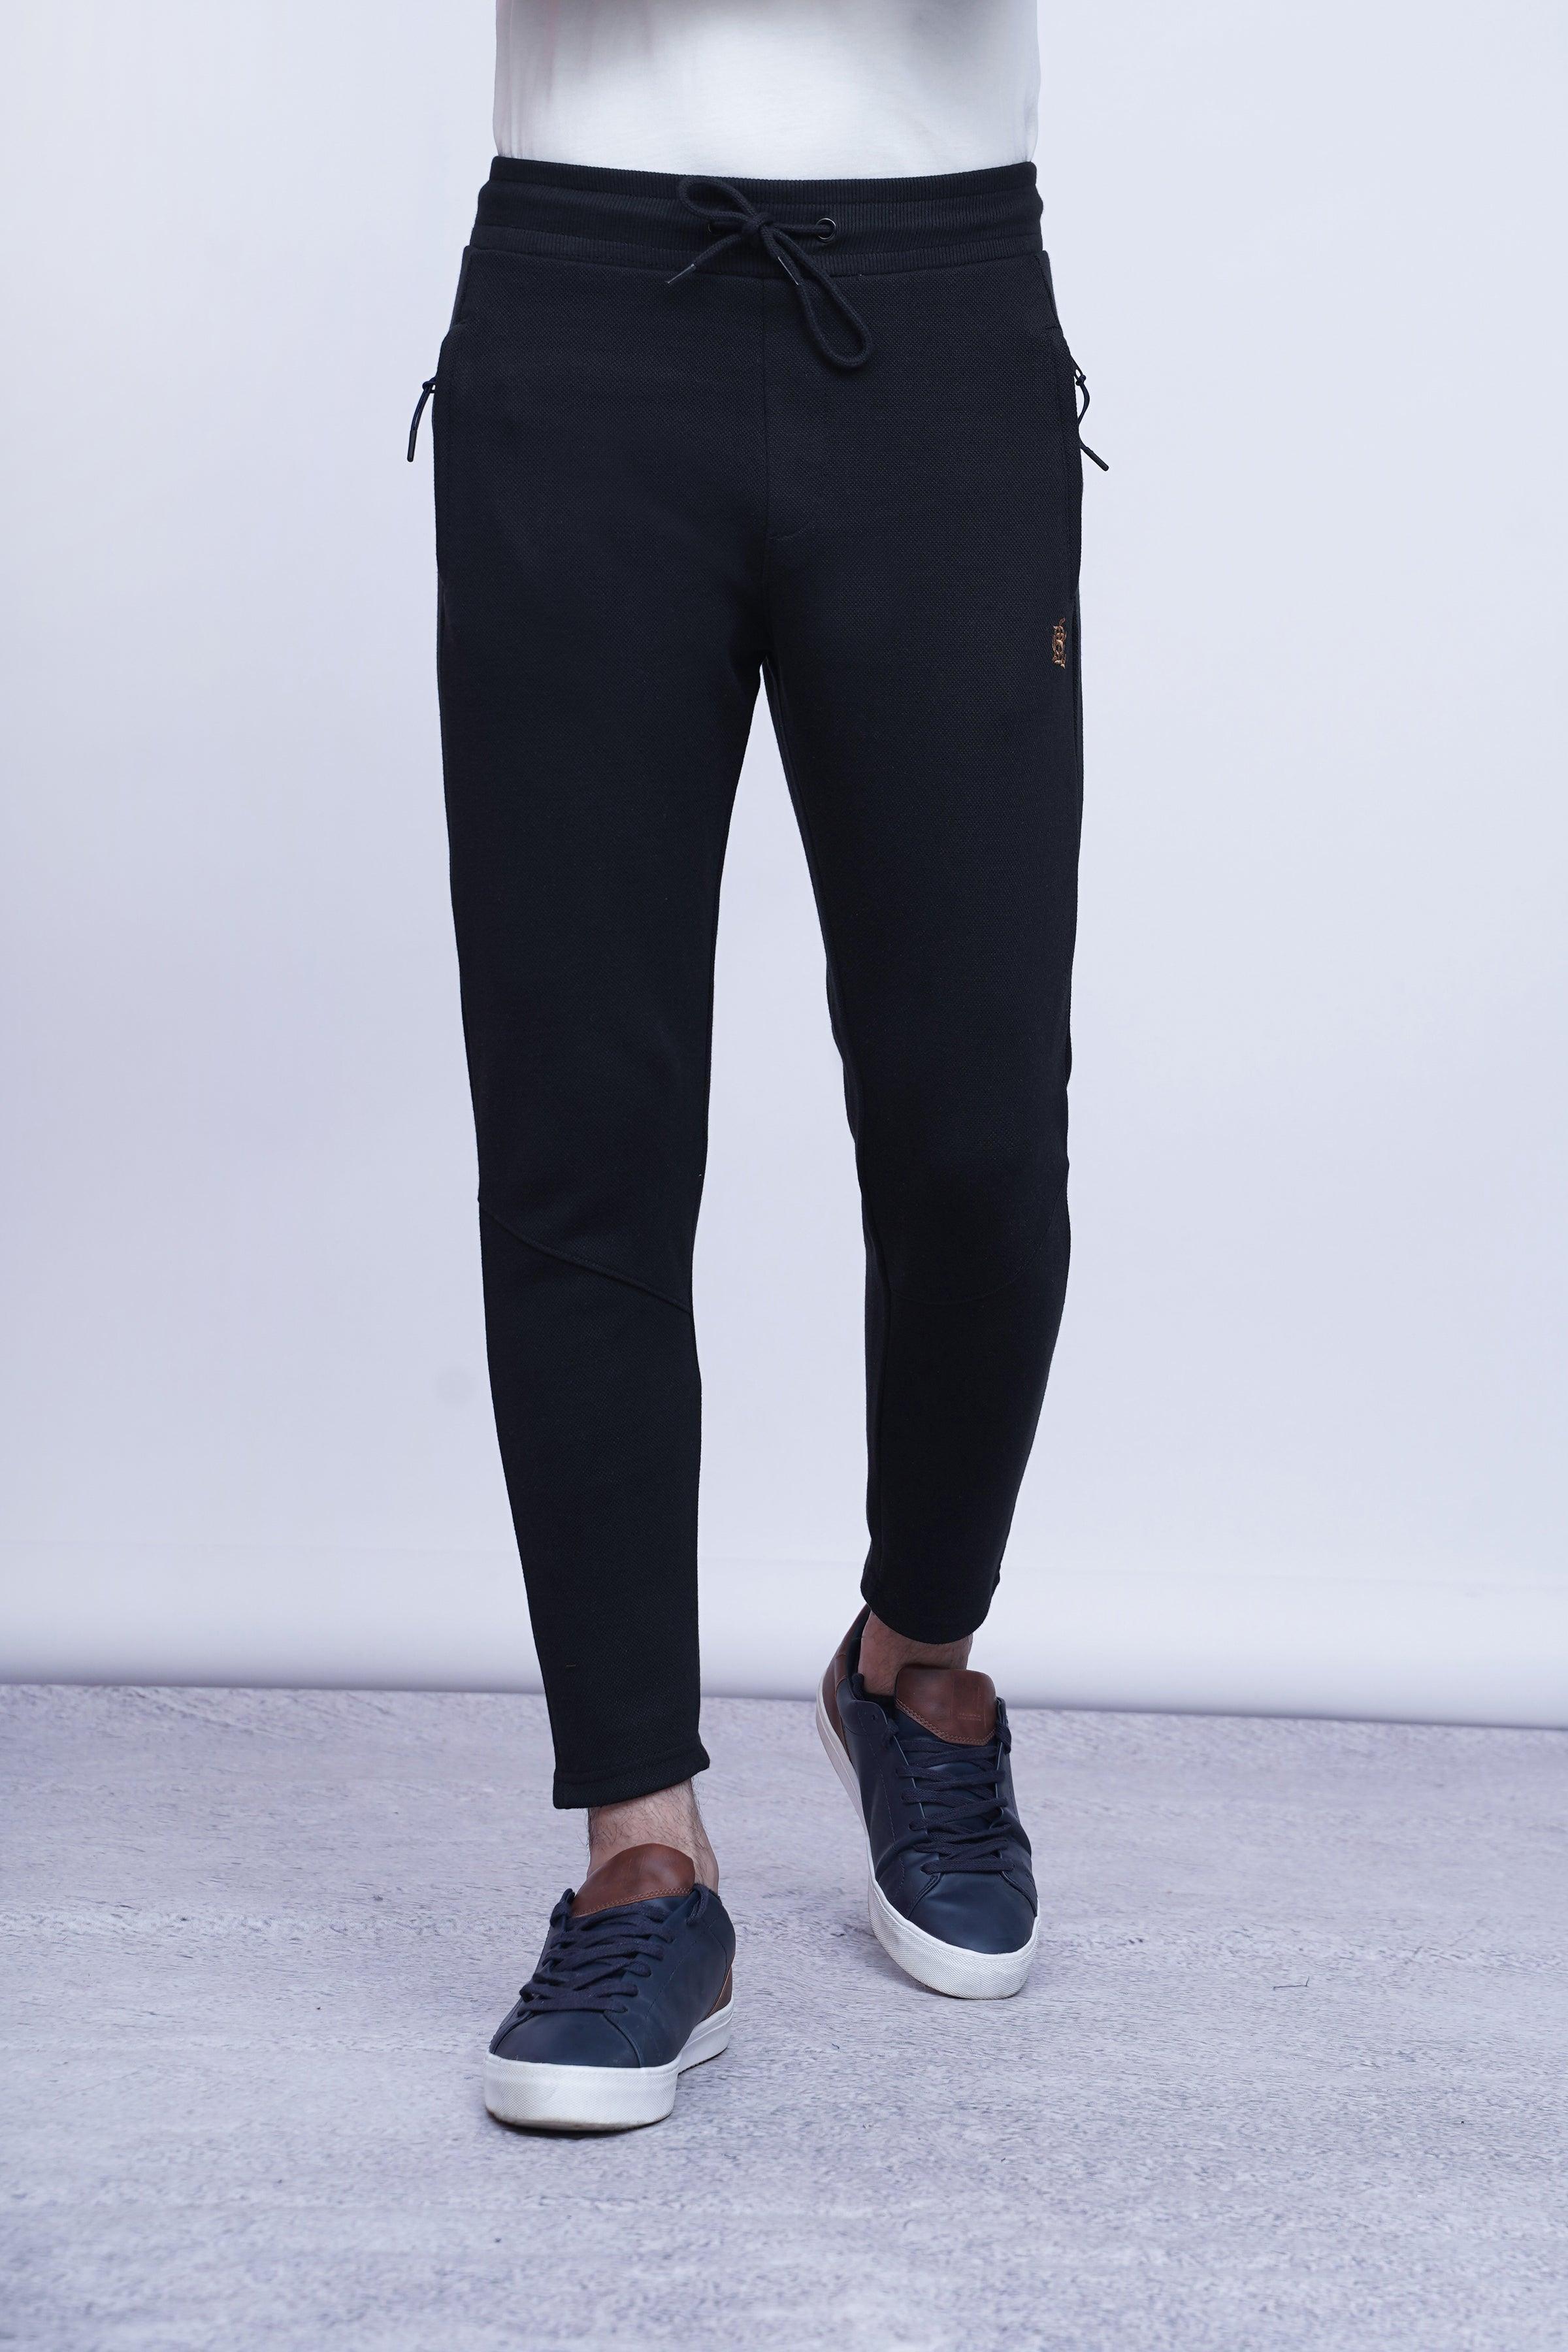 JUMBO PIQUE TROUSER BLACK at Charcoal Clothing